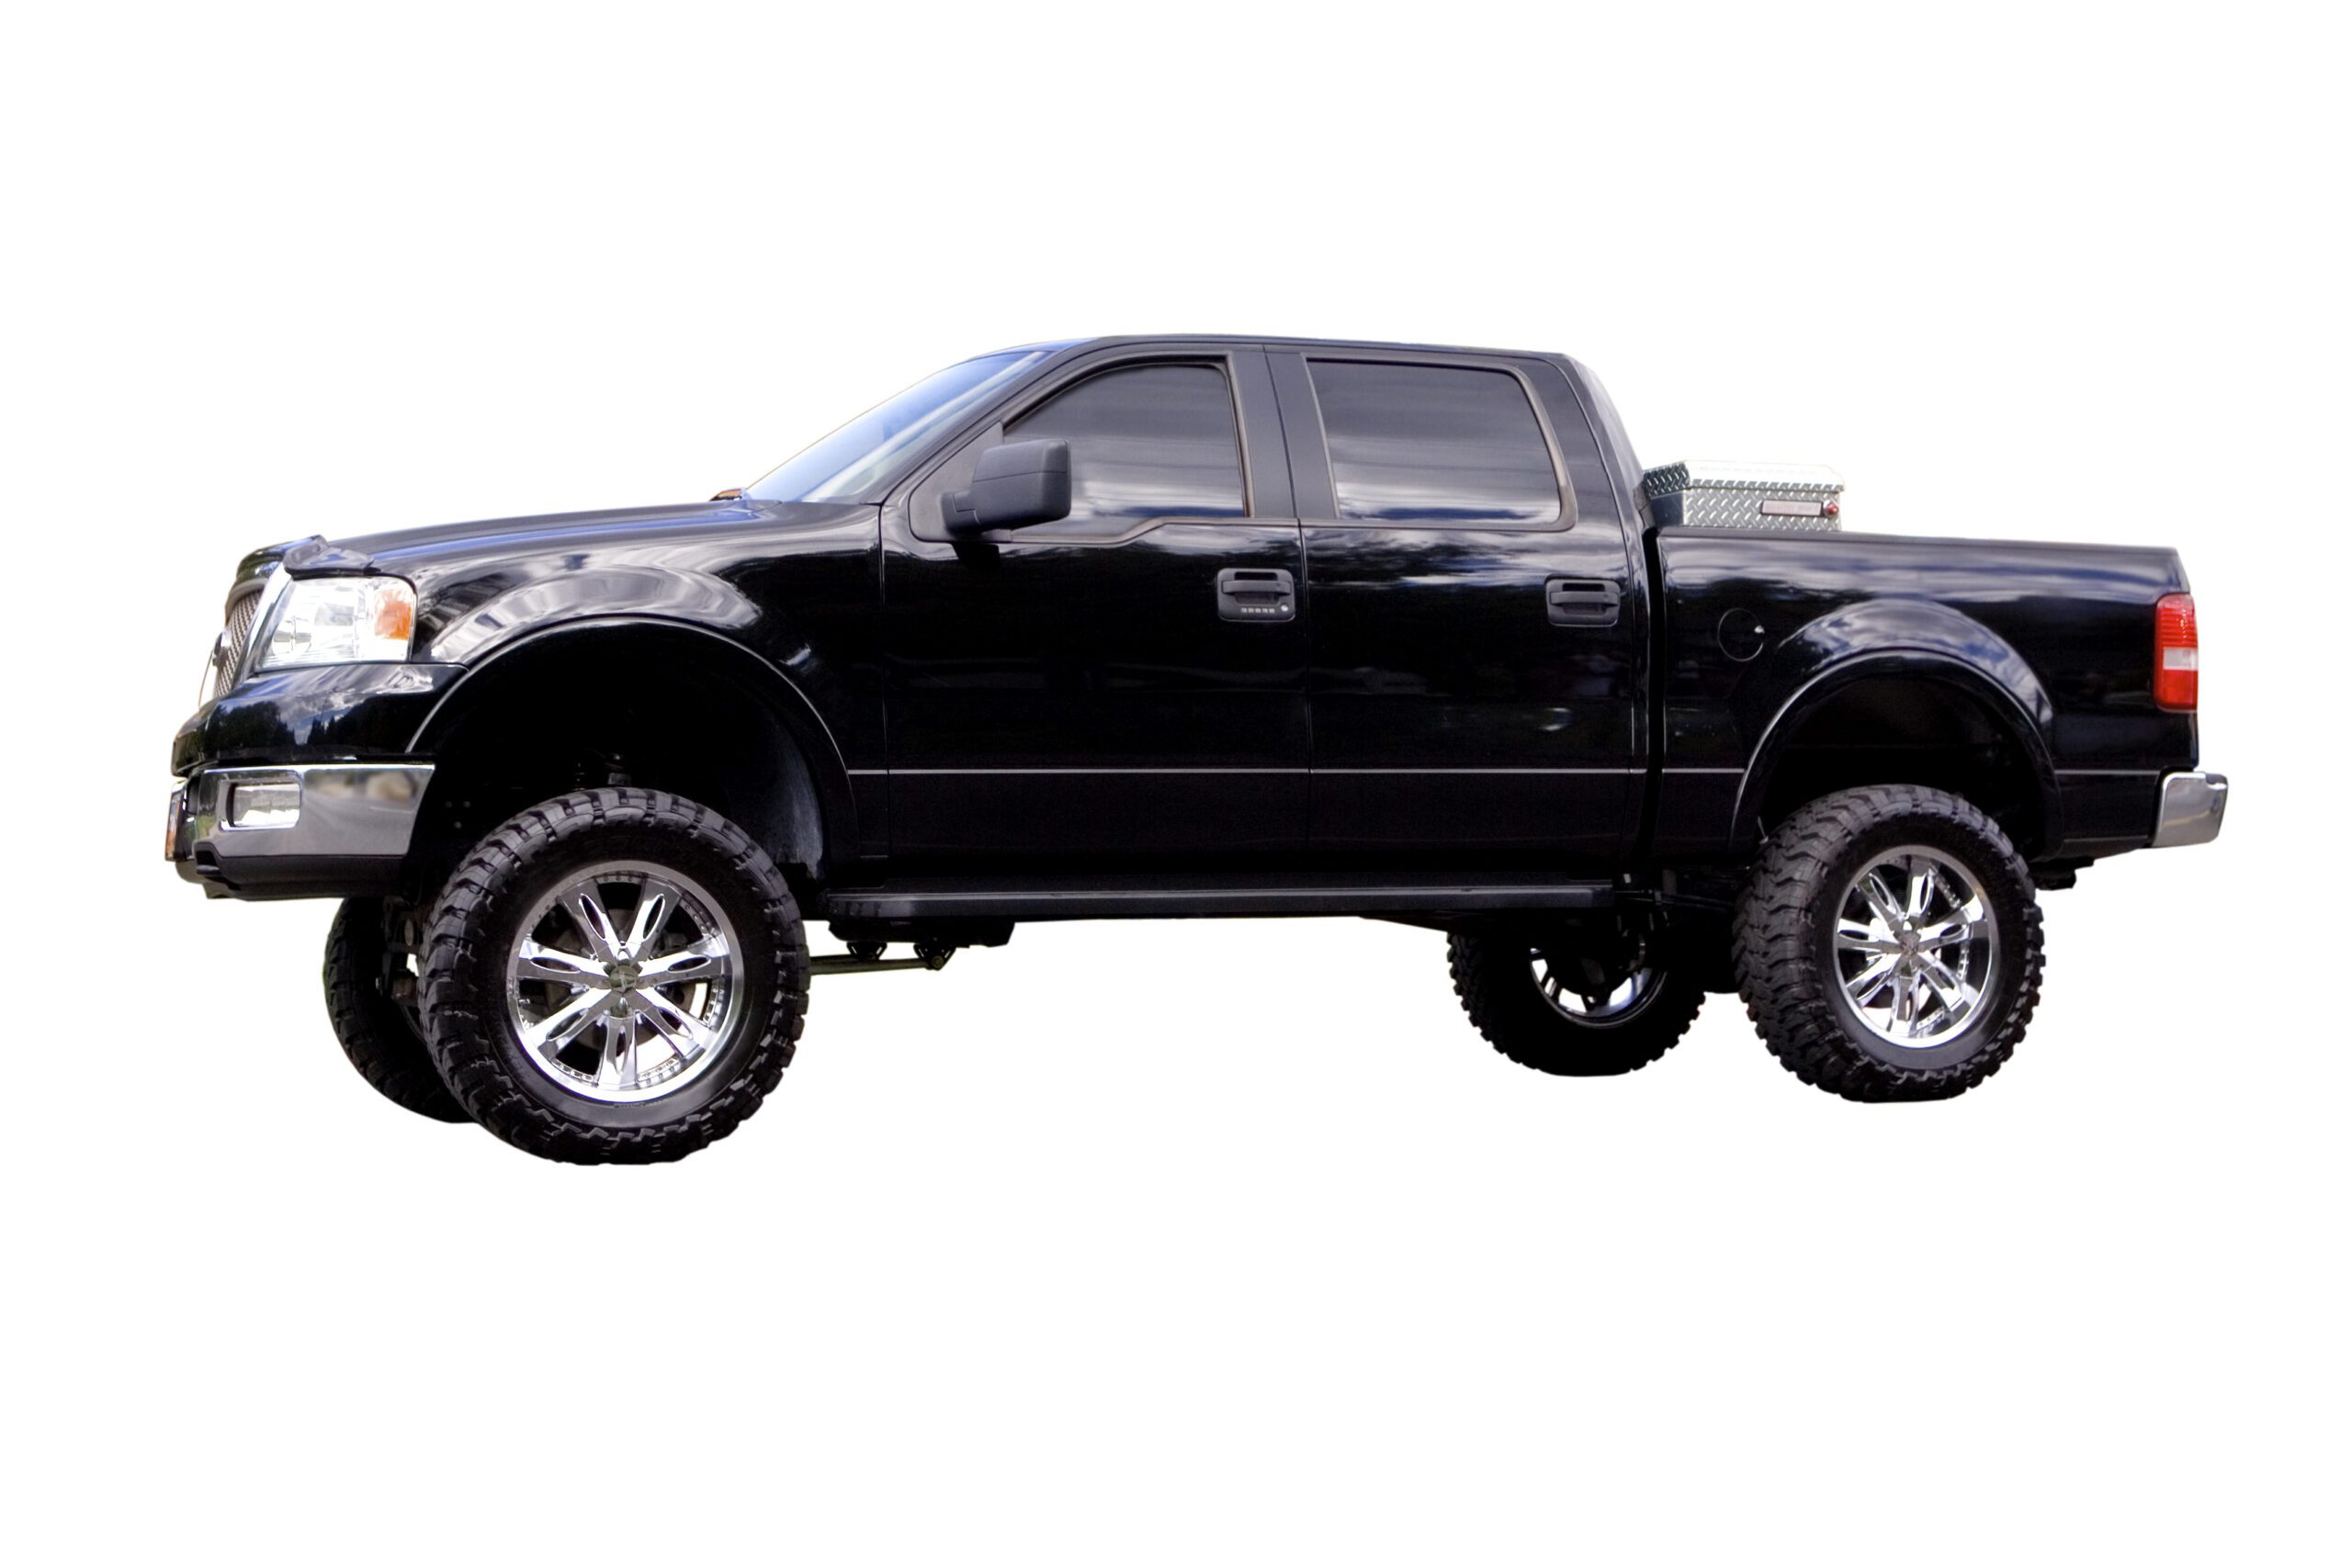 What are the Disadvantages of Putting a Lift Kit on a Truck?